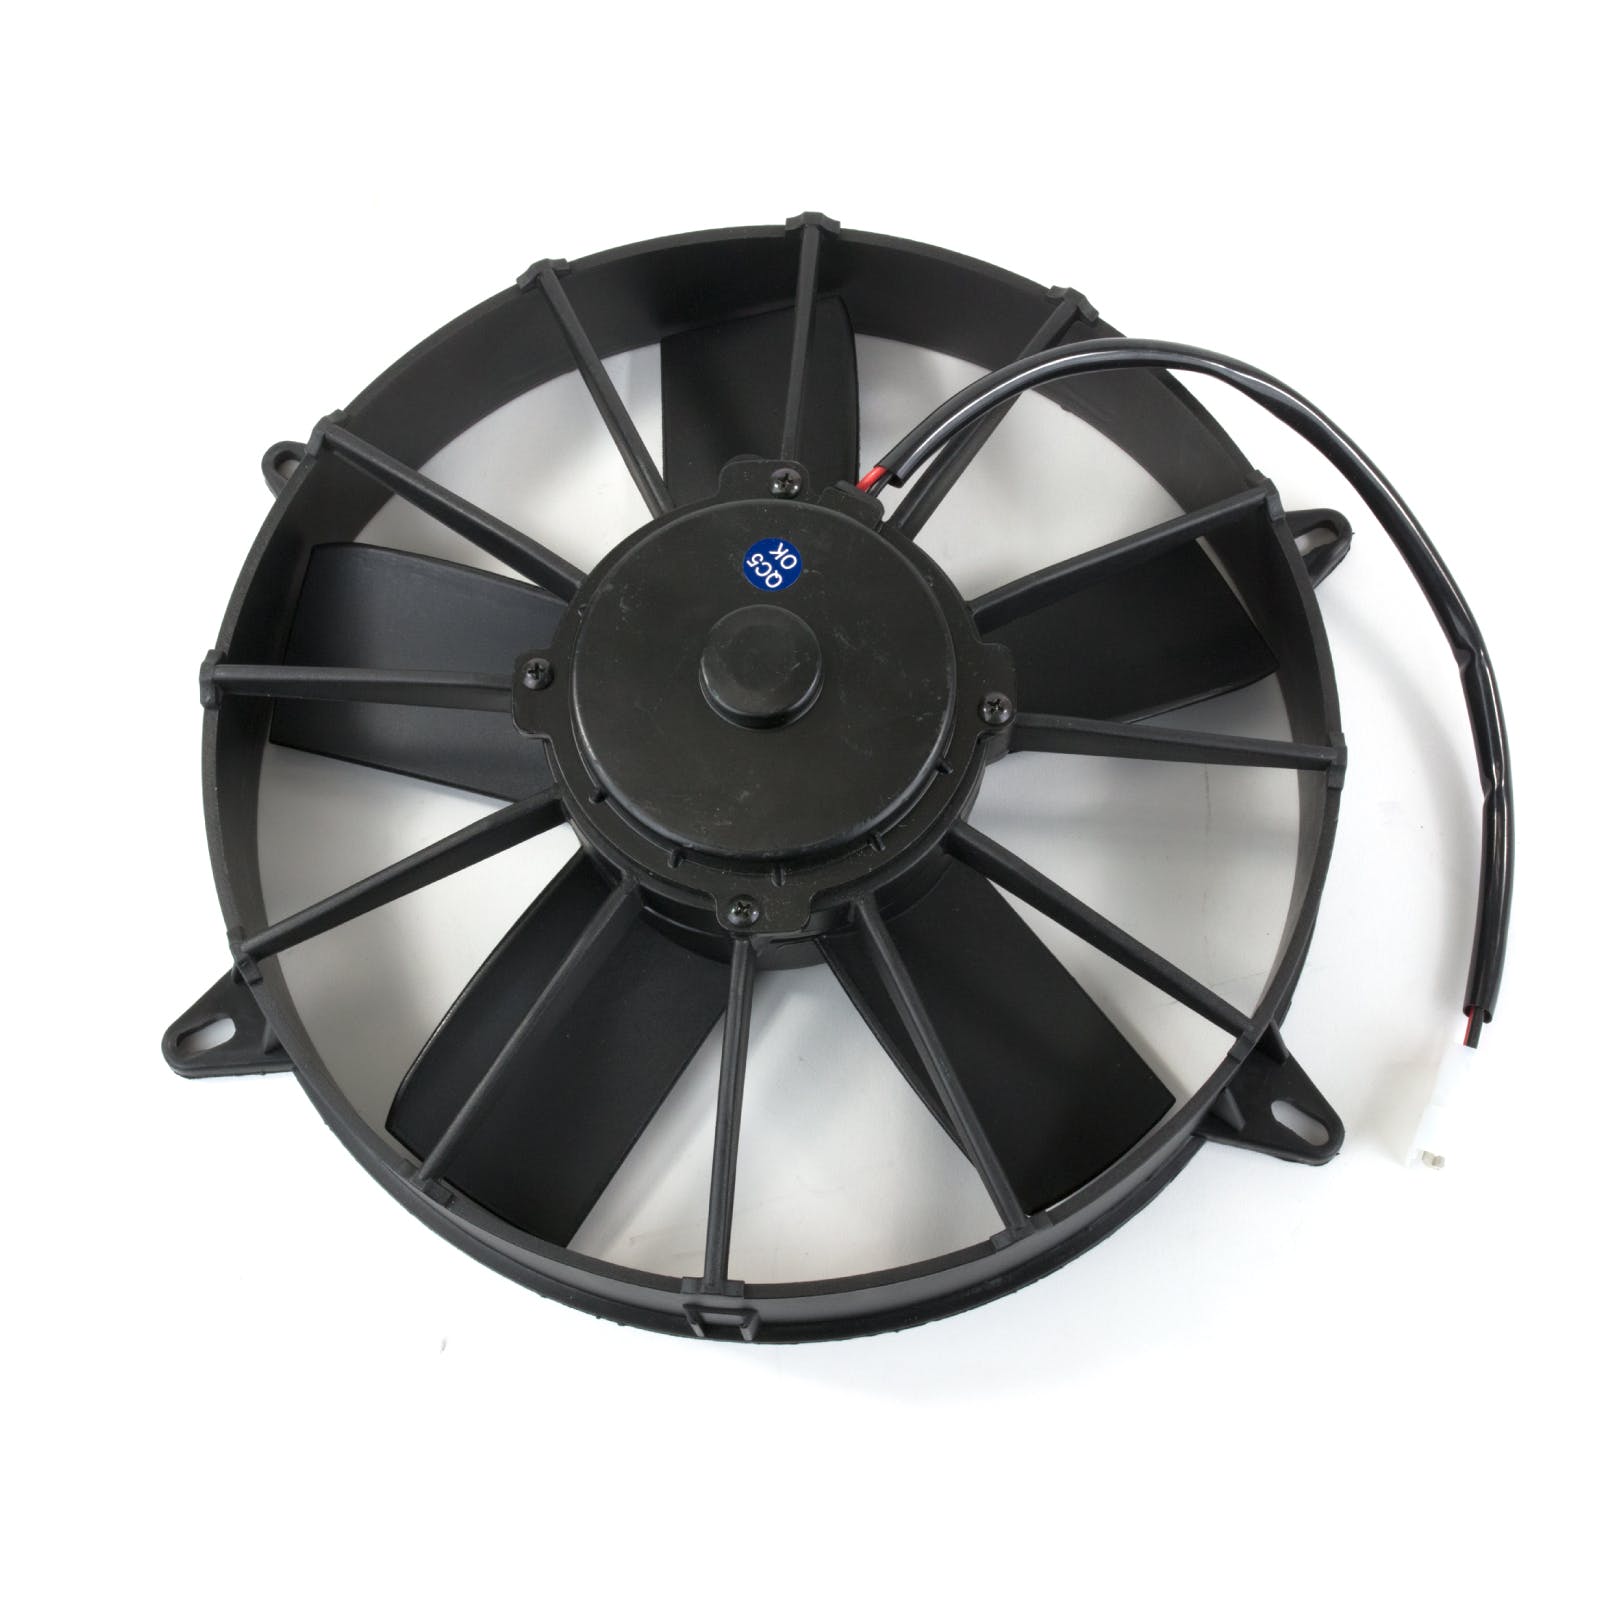 Top Street Performance HC7211 11 inch Proflow Universal Electric Cooling Fan, Straight Blade, Puller, 1,400 CFM